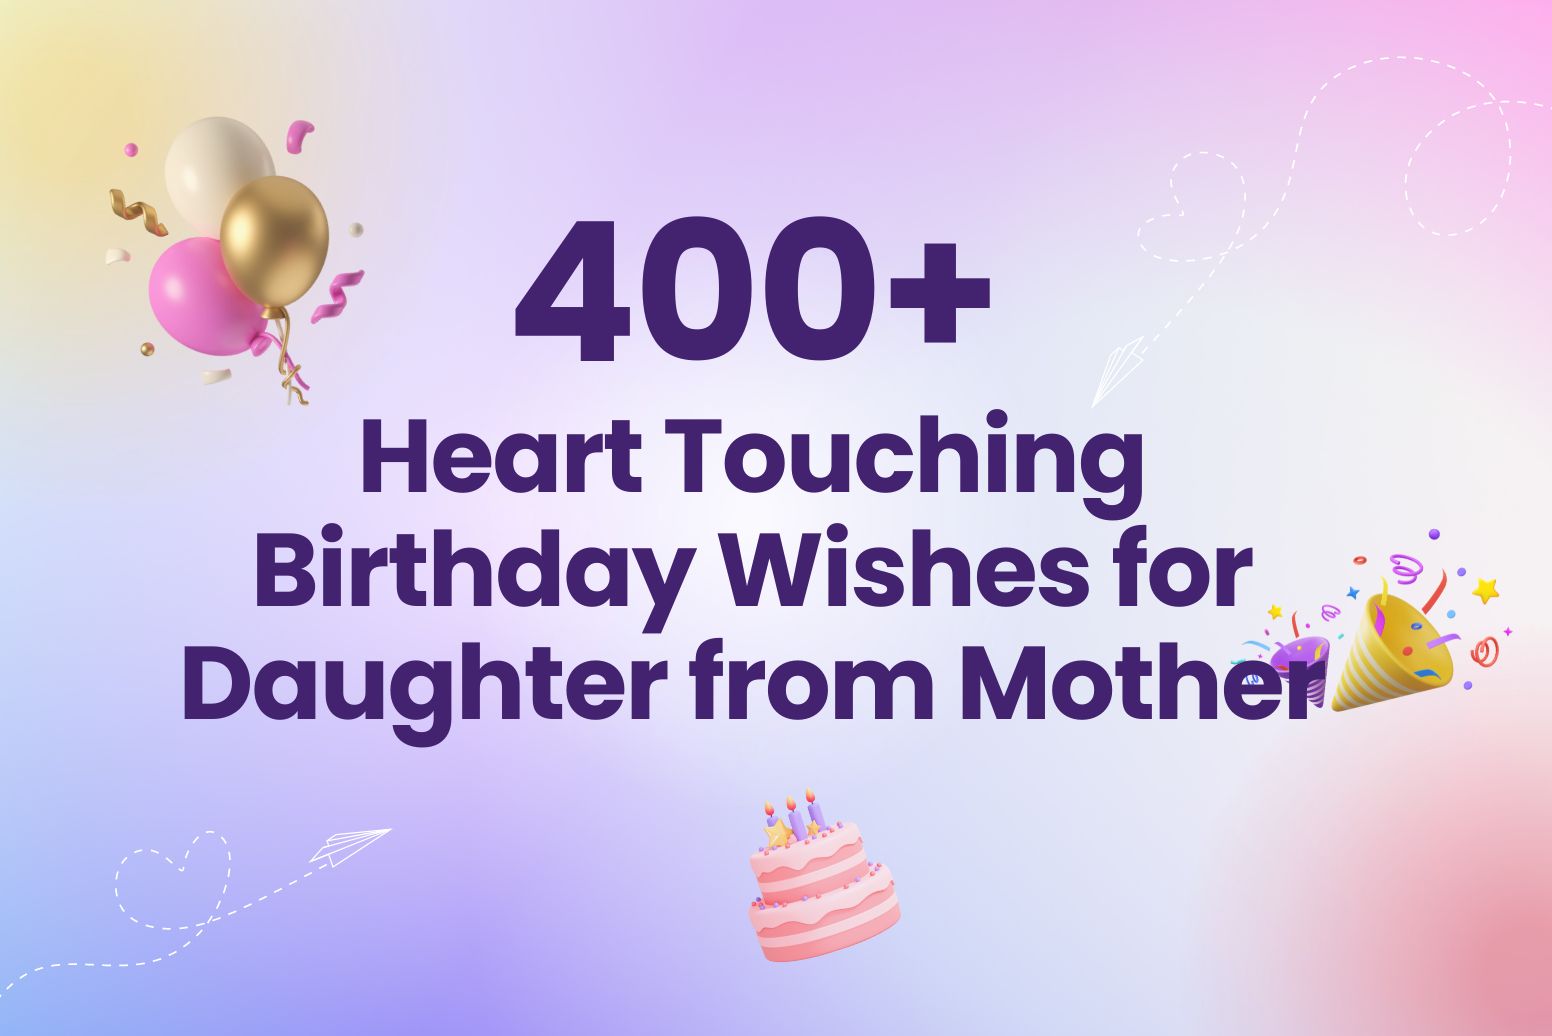 400+ Heart Touching Birthday Wishes for Daughter from Mother - Arvin